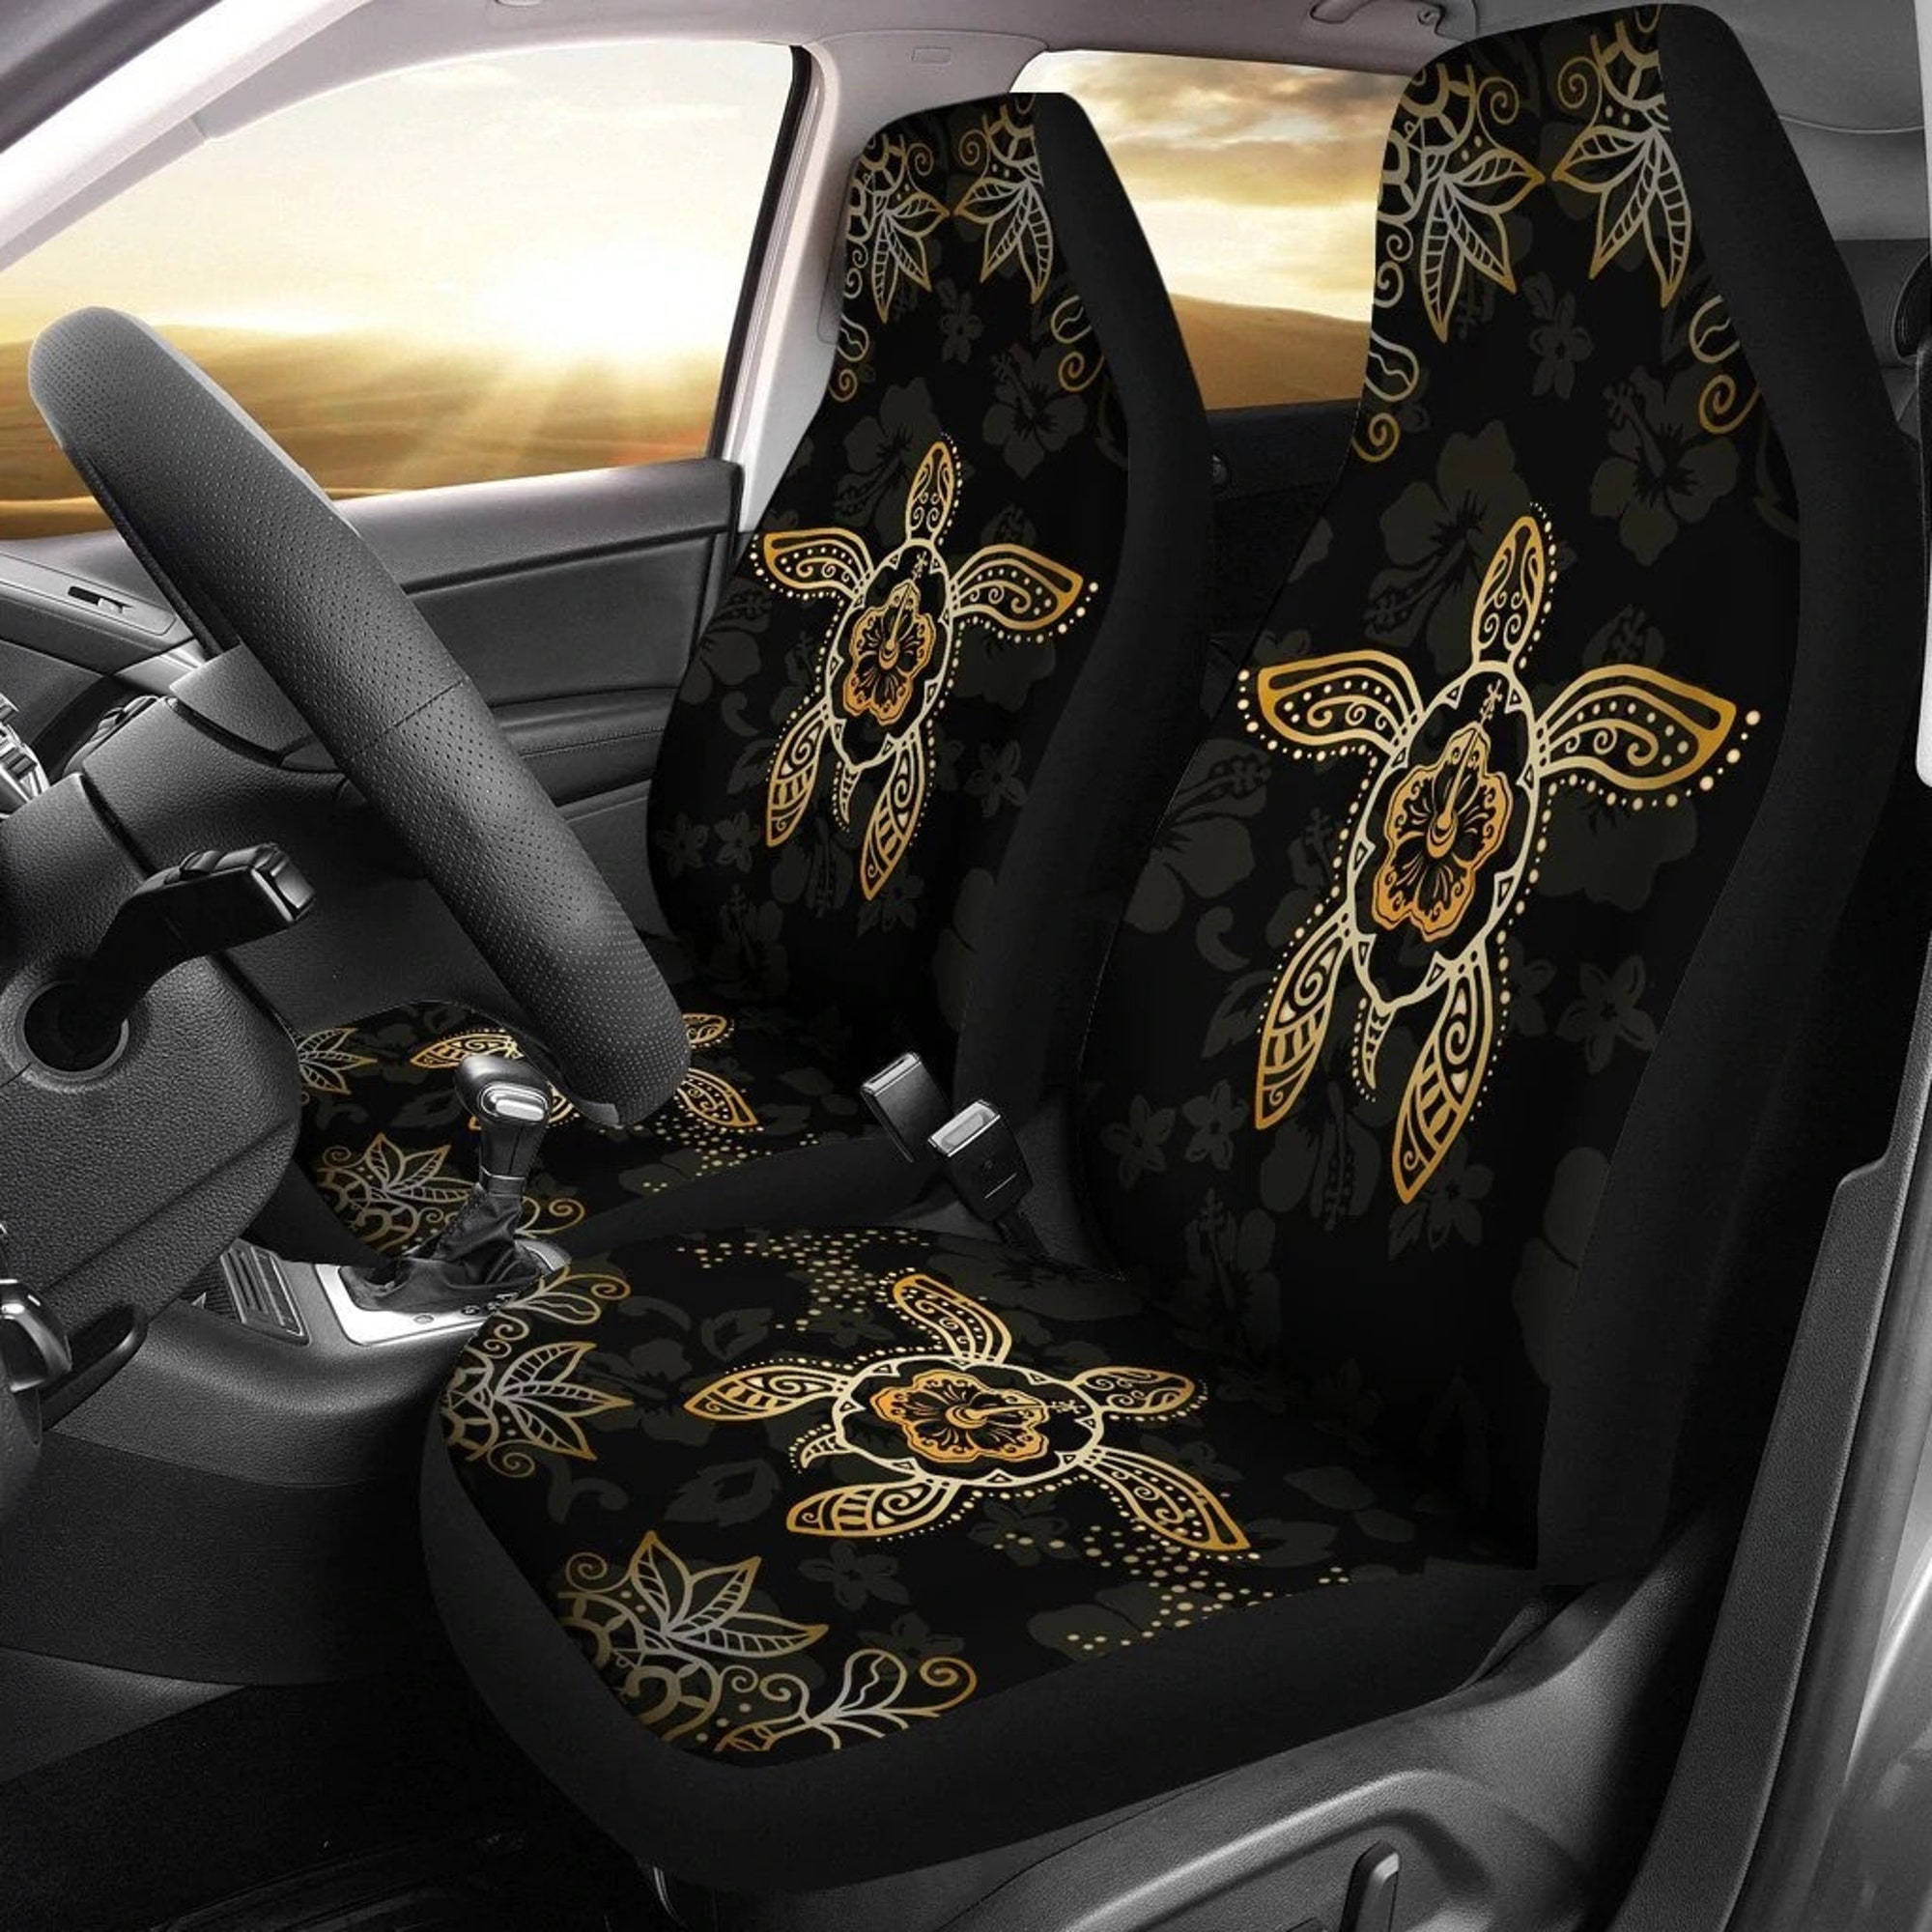 Turtle Car Seat Cover, Personalized Car Seat Covers